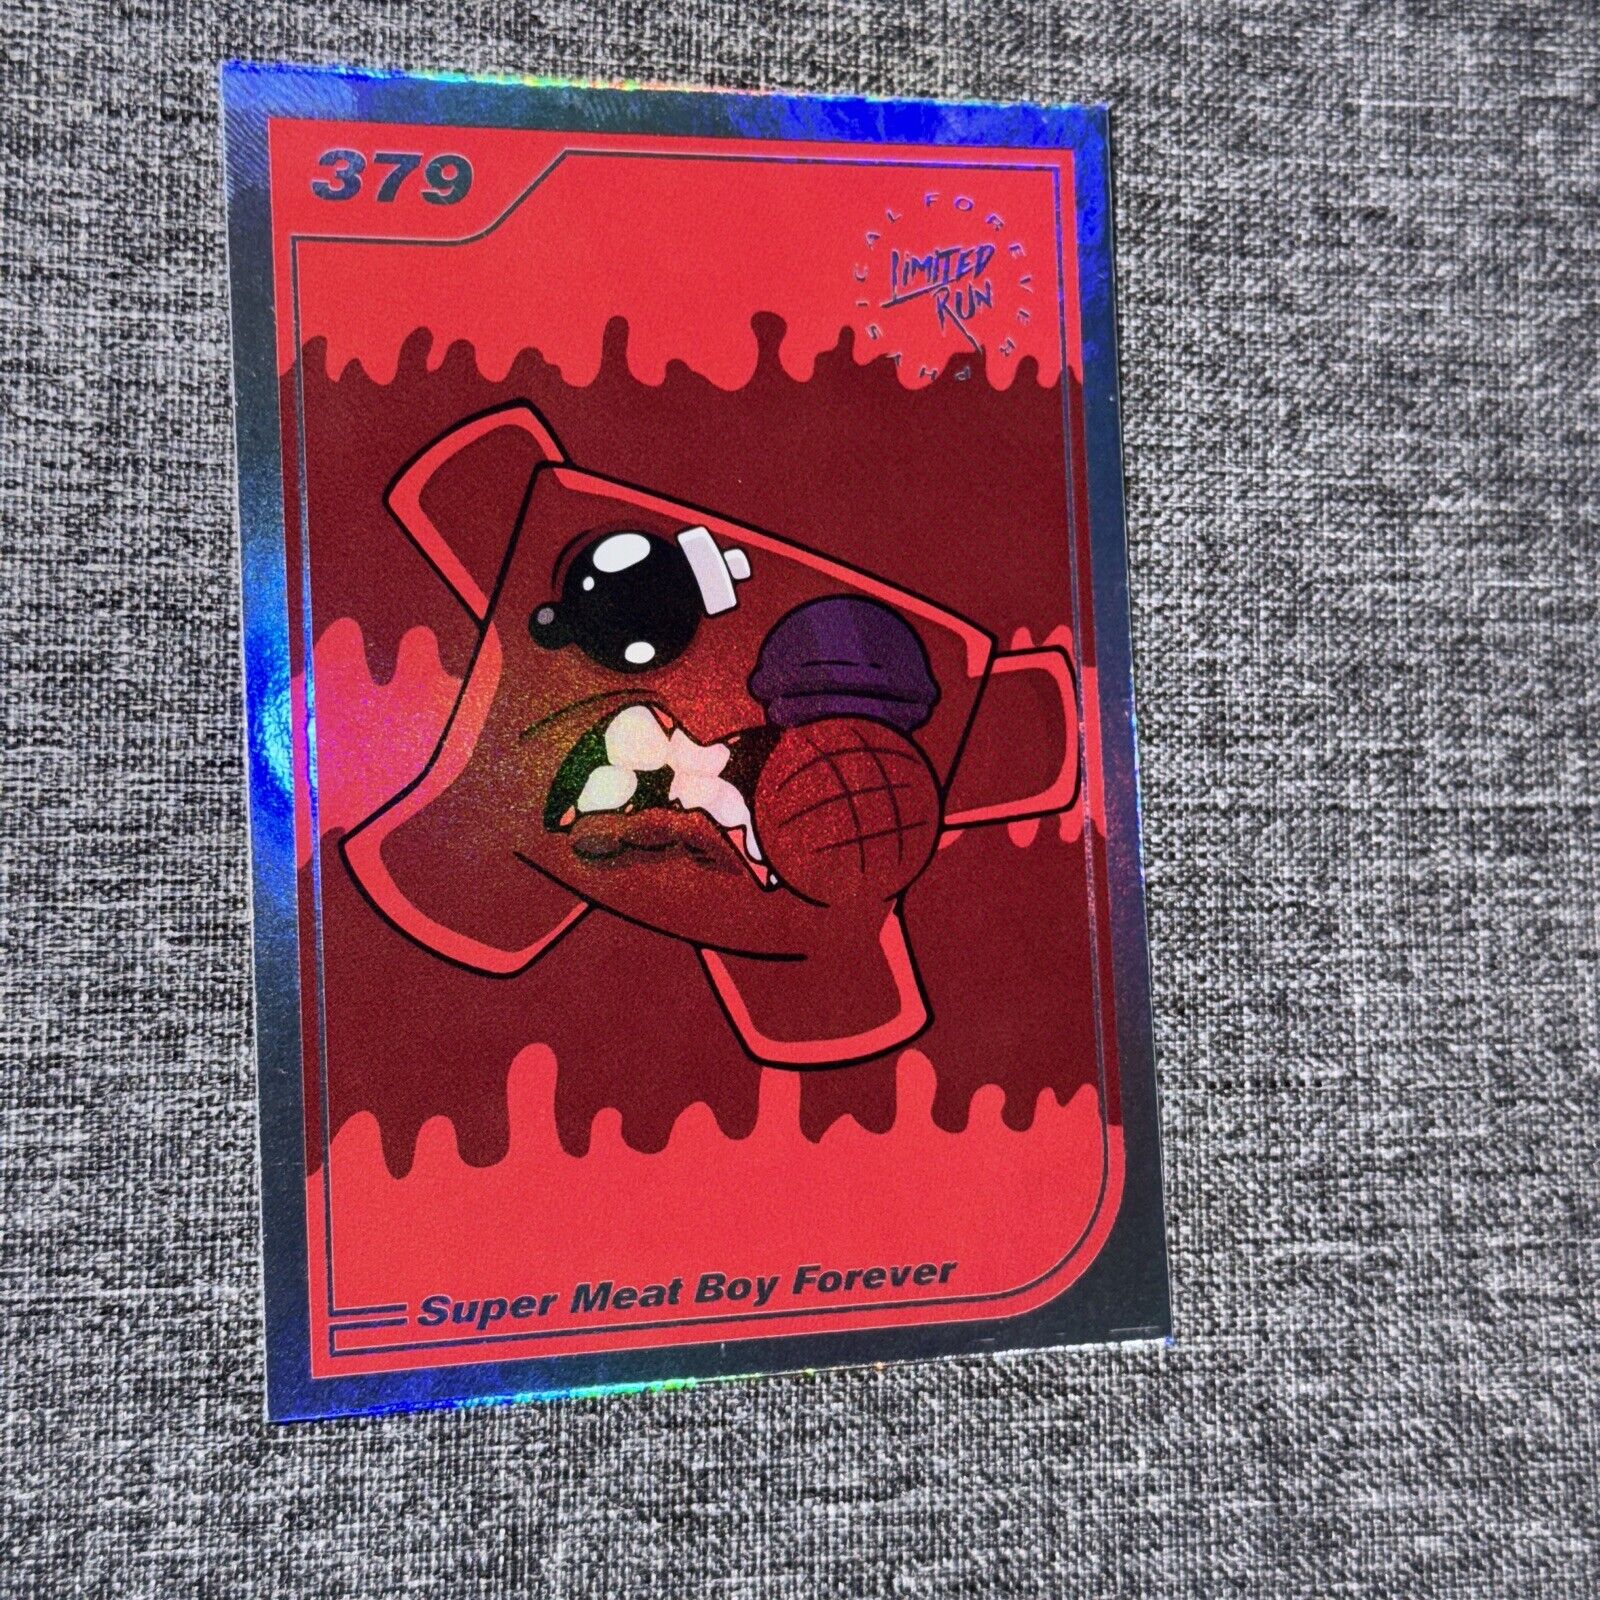 Super Meat Boy Forever Limited Run Games #379 Silver Trading Card